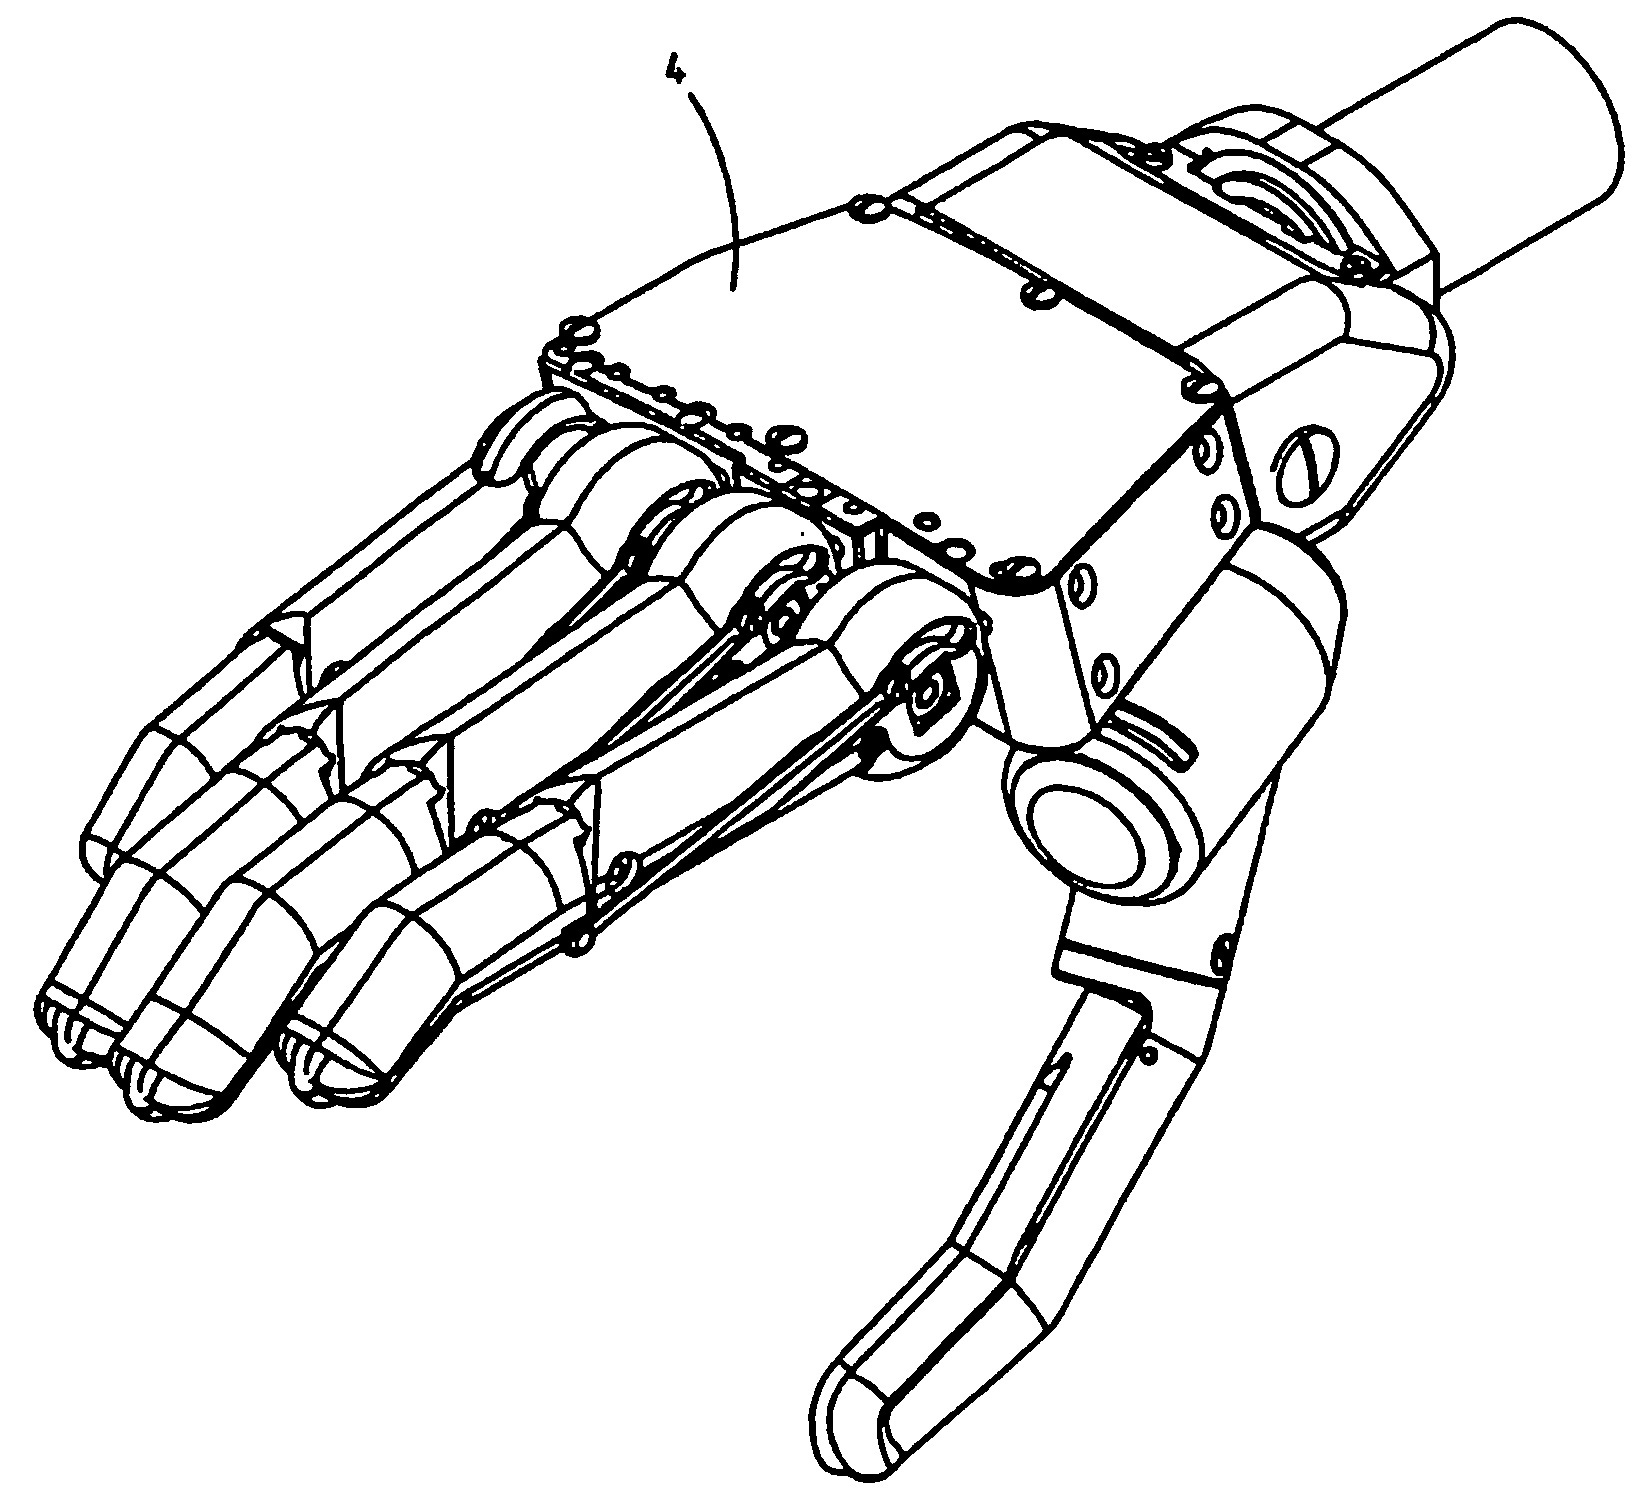 Drive device for a finger prosthesis